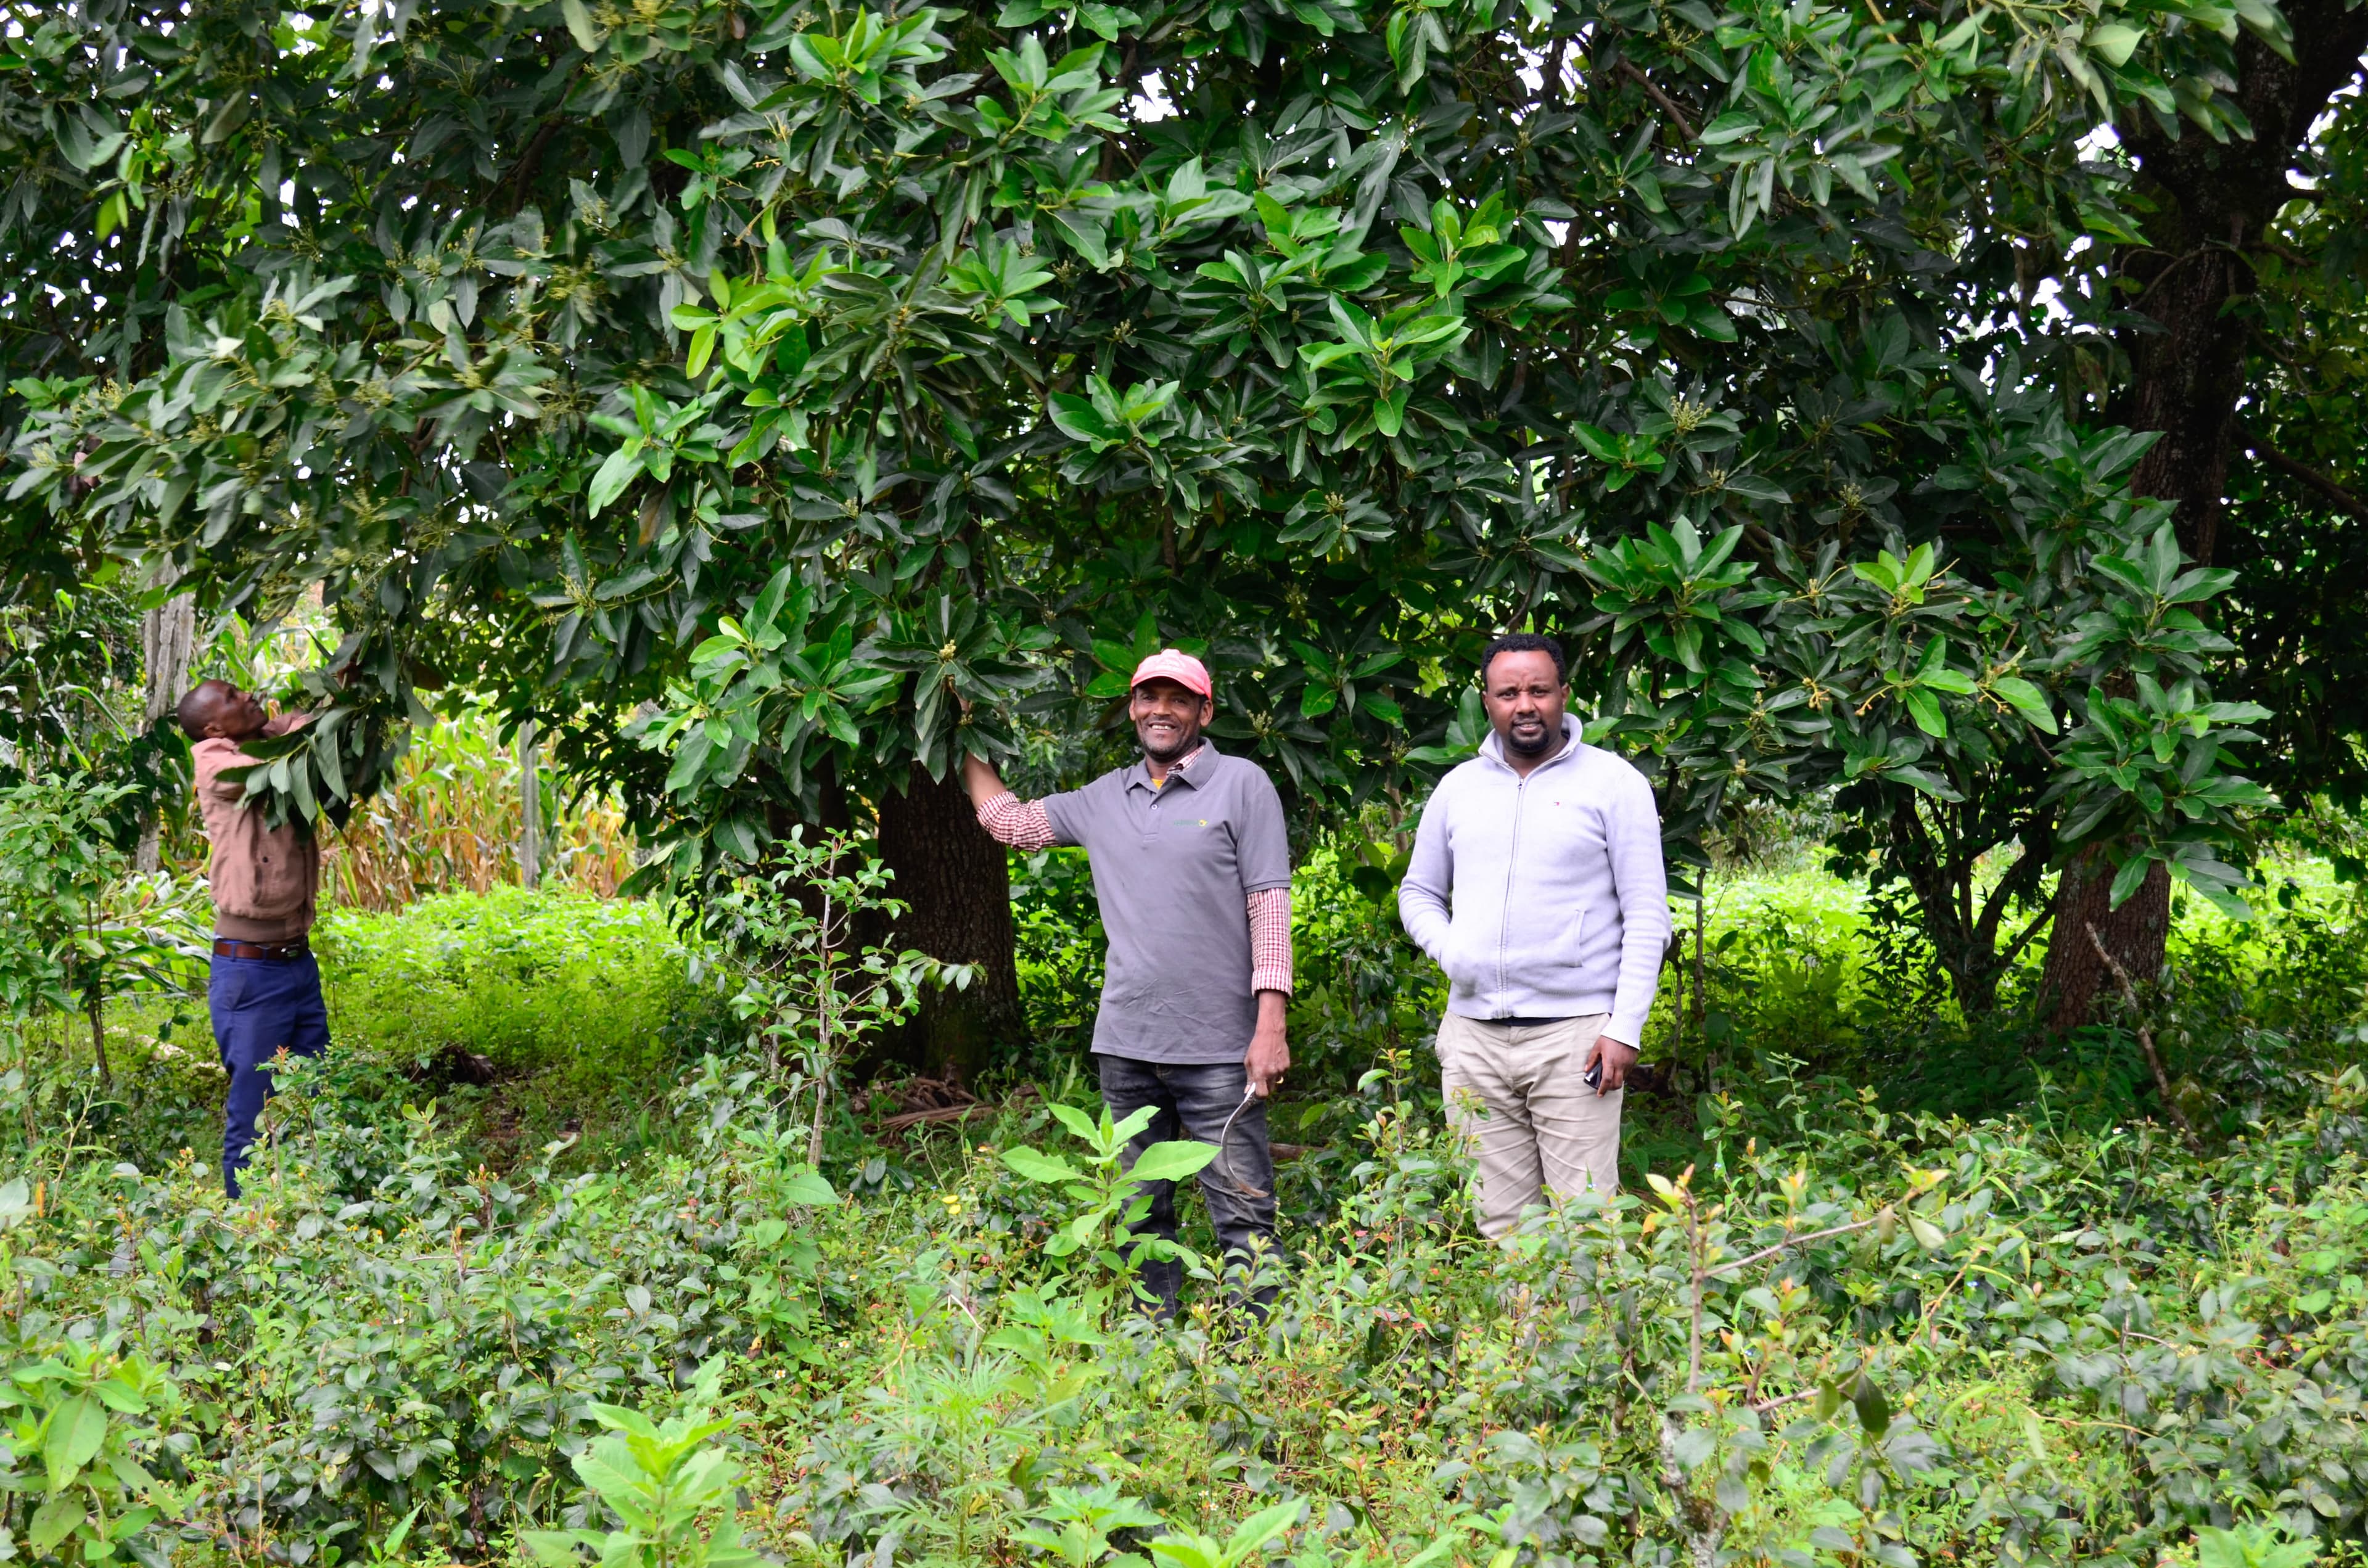 Organic avocado oil sourcing and processing in Ethiopia